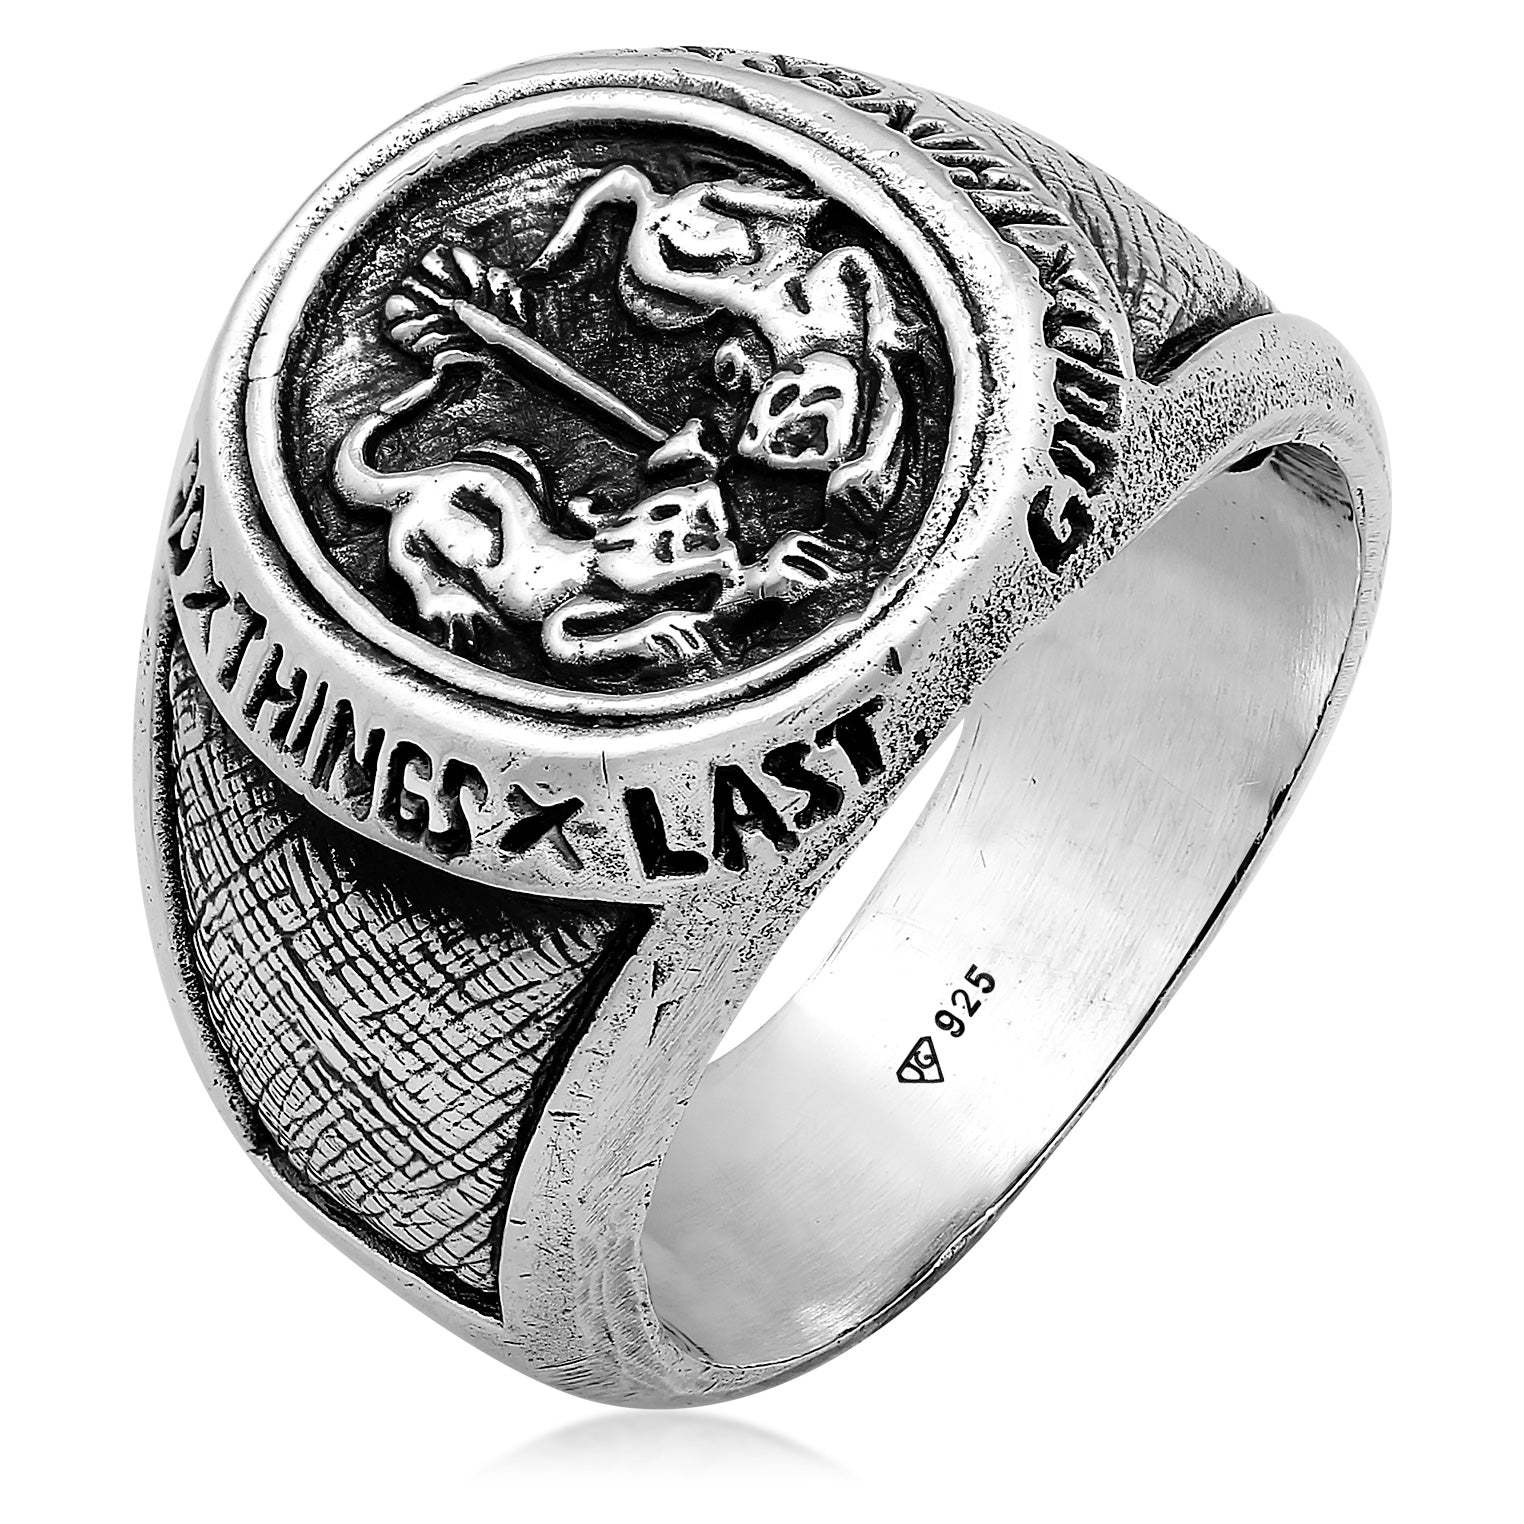 The Twin Tiger Ring